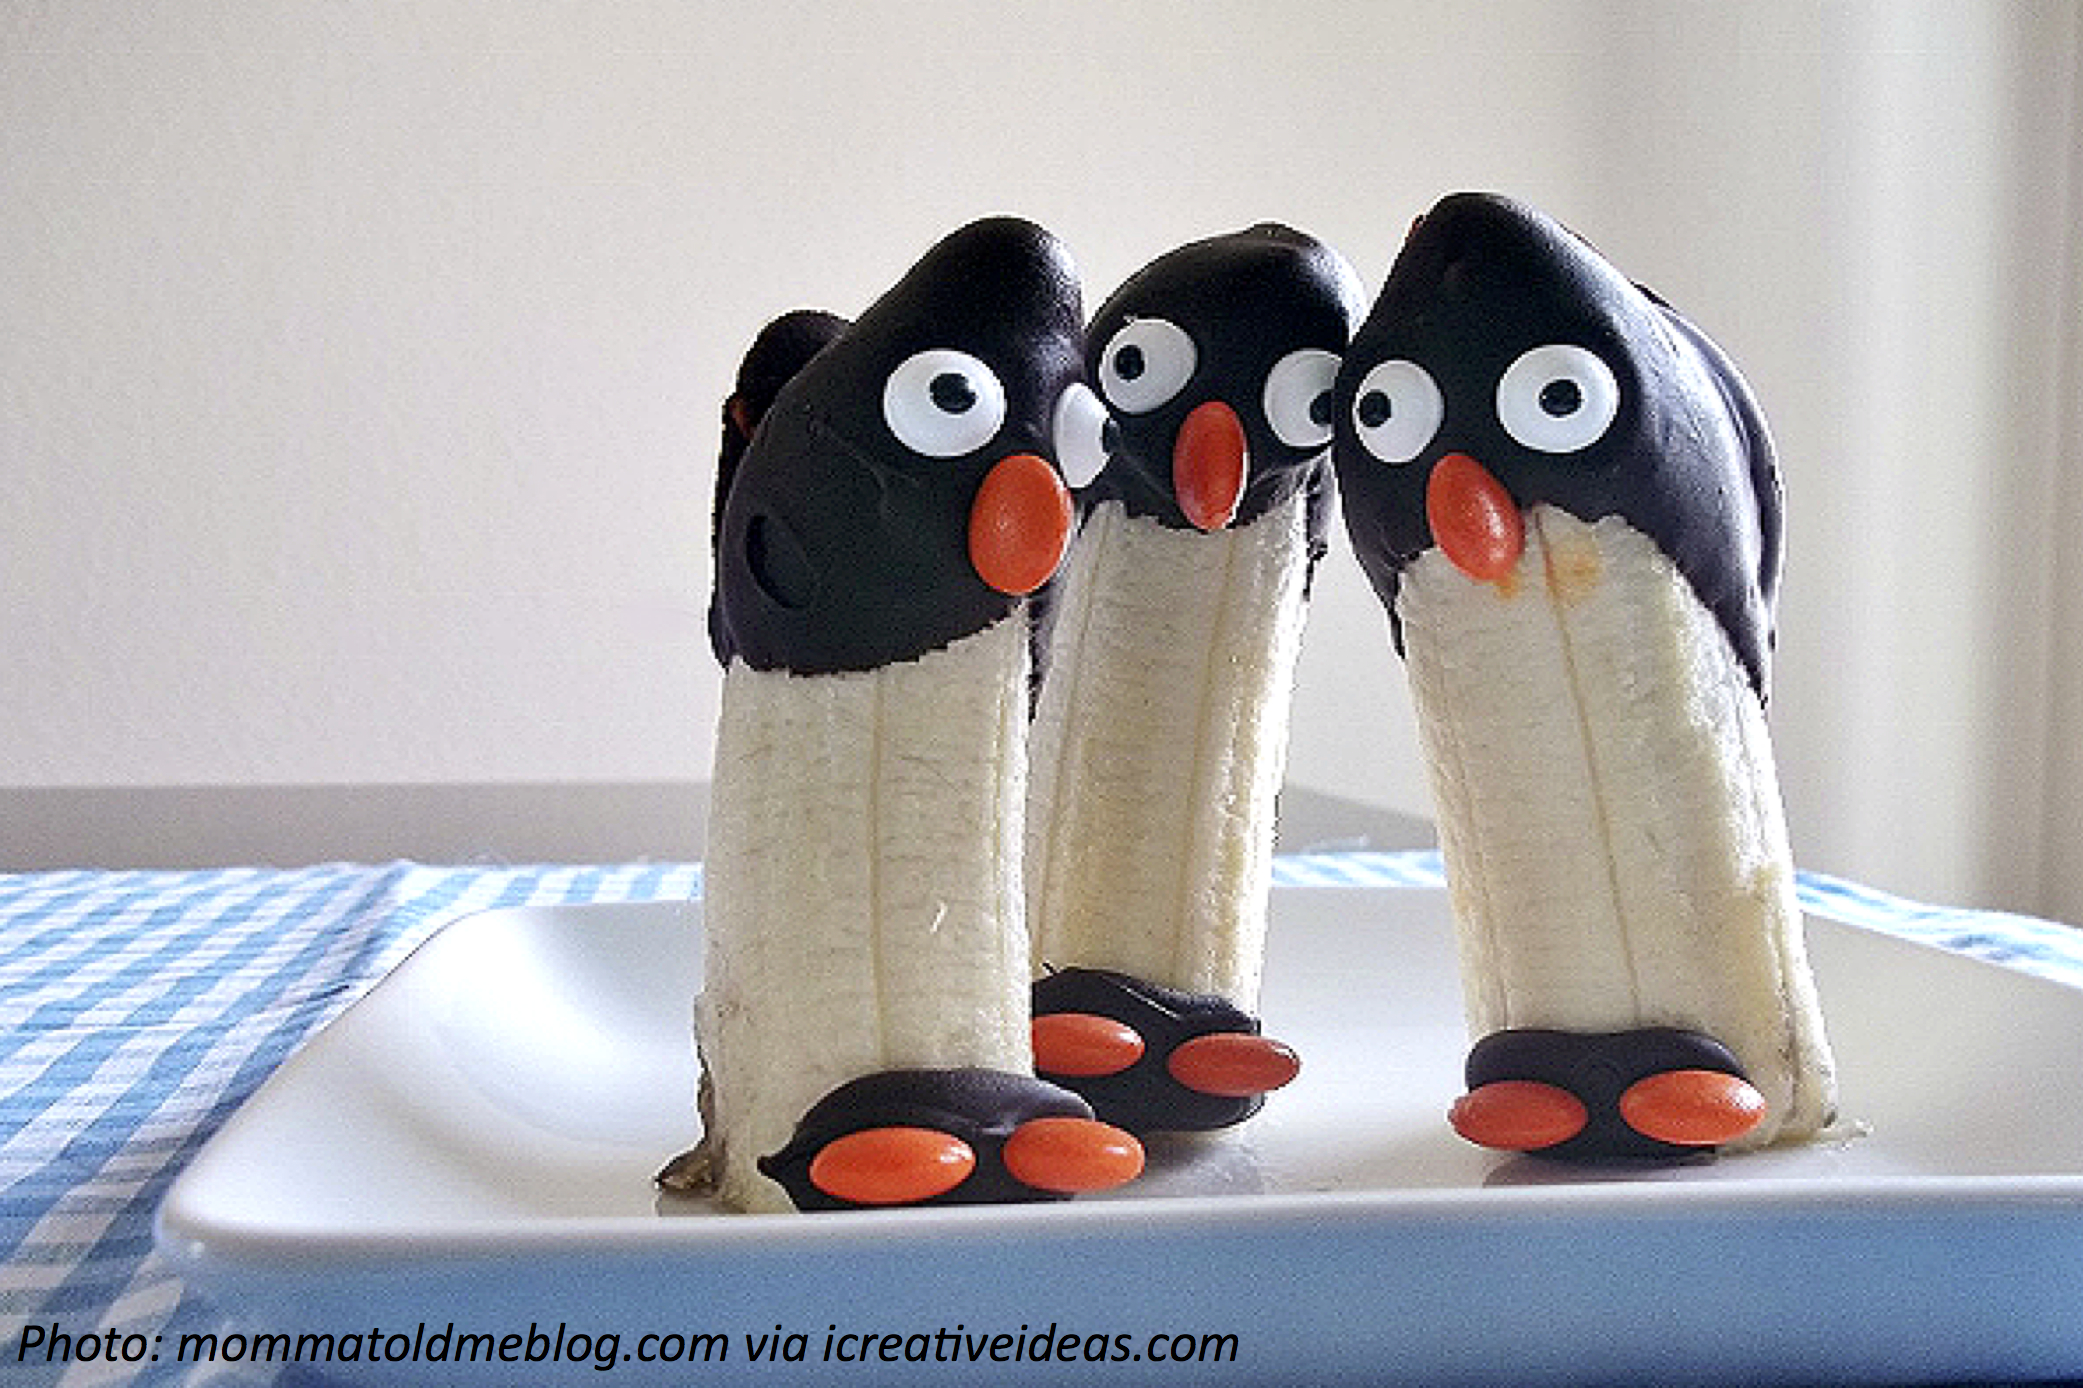 How to Turn a Banana into a Penguin